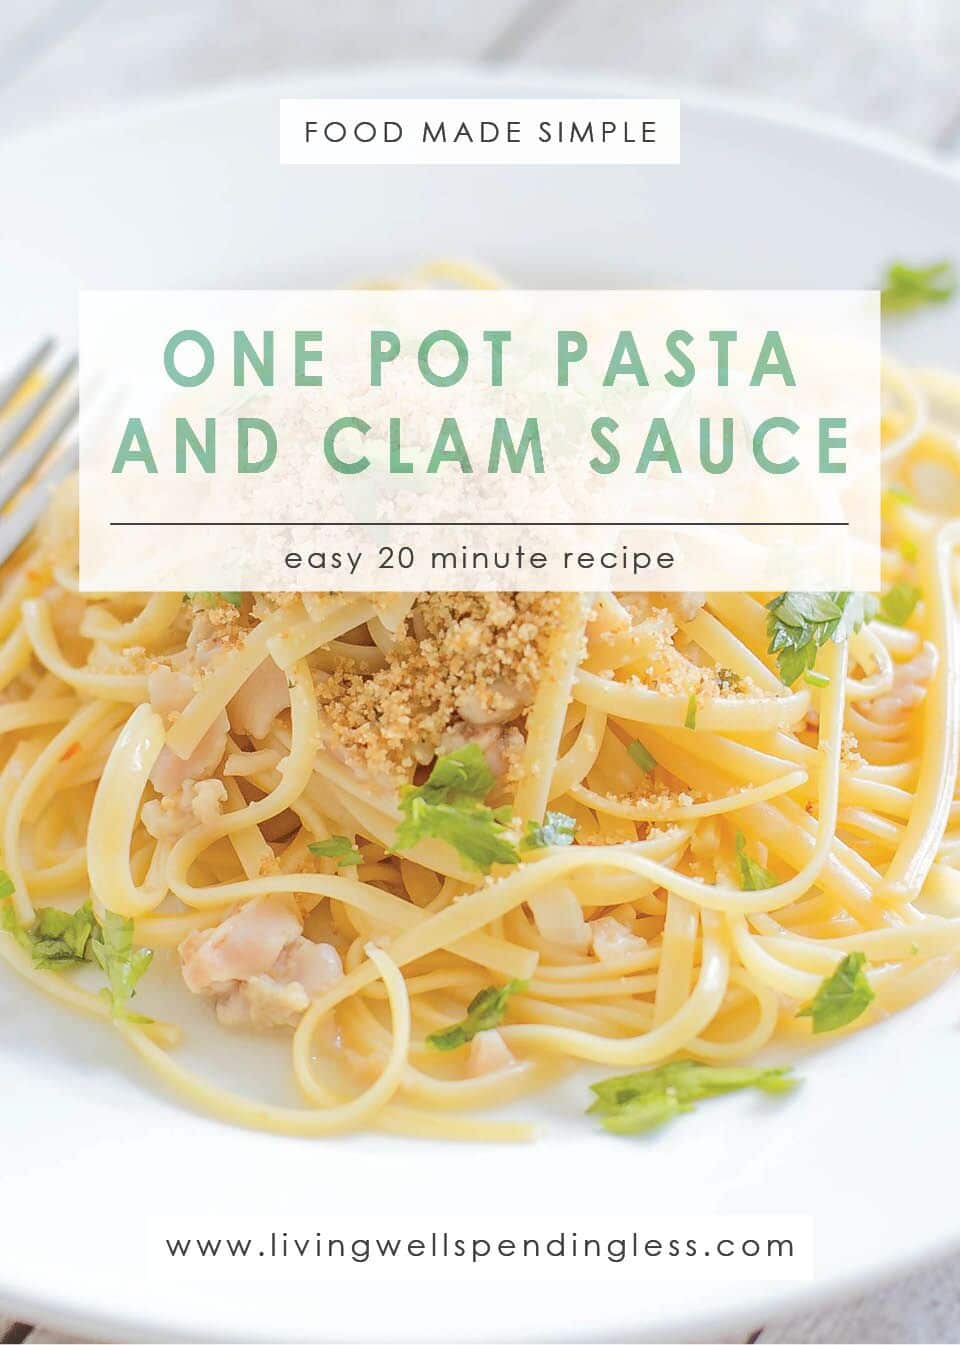 Serve One Pot Pasta and Clam Sauce at your next dinner party for a simple yet delicious meal your guests will enjoy!